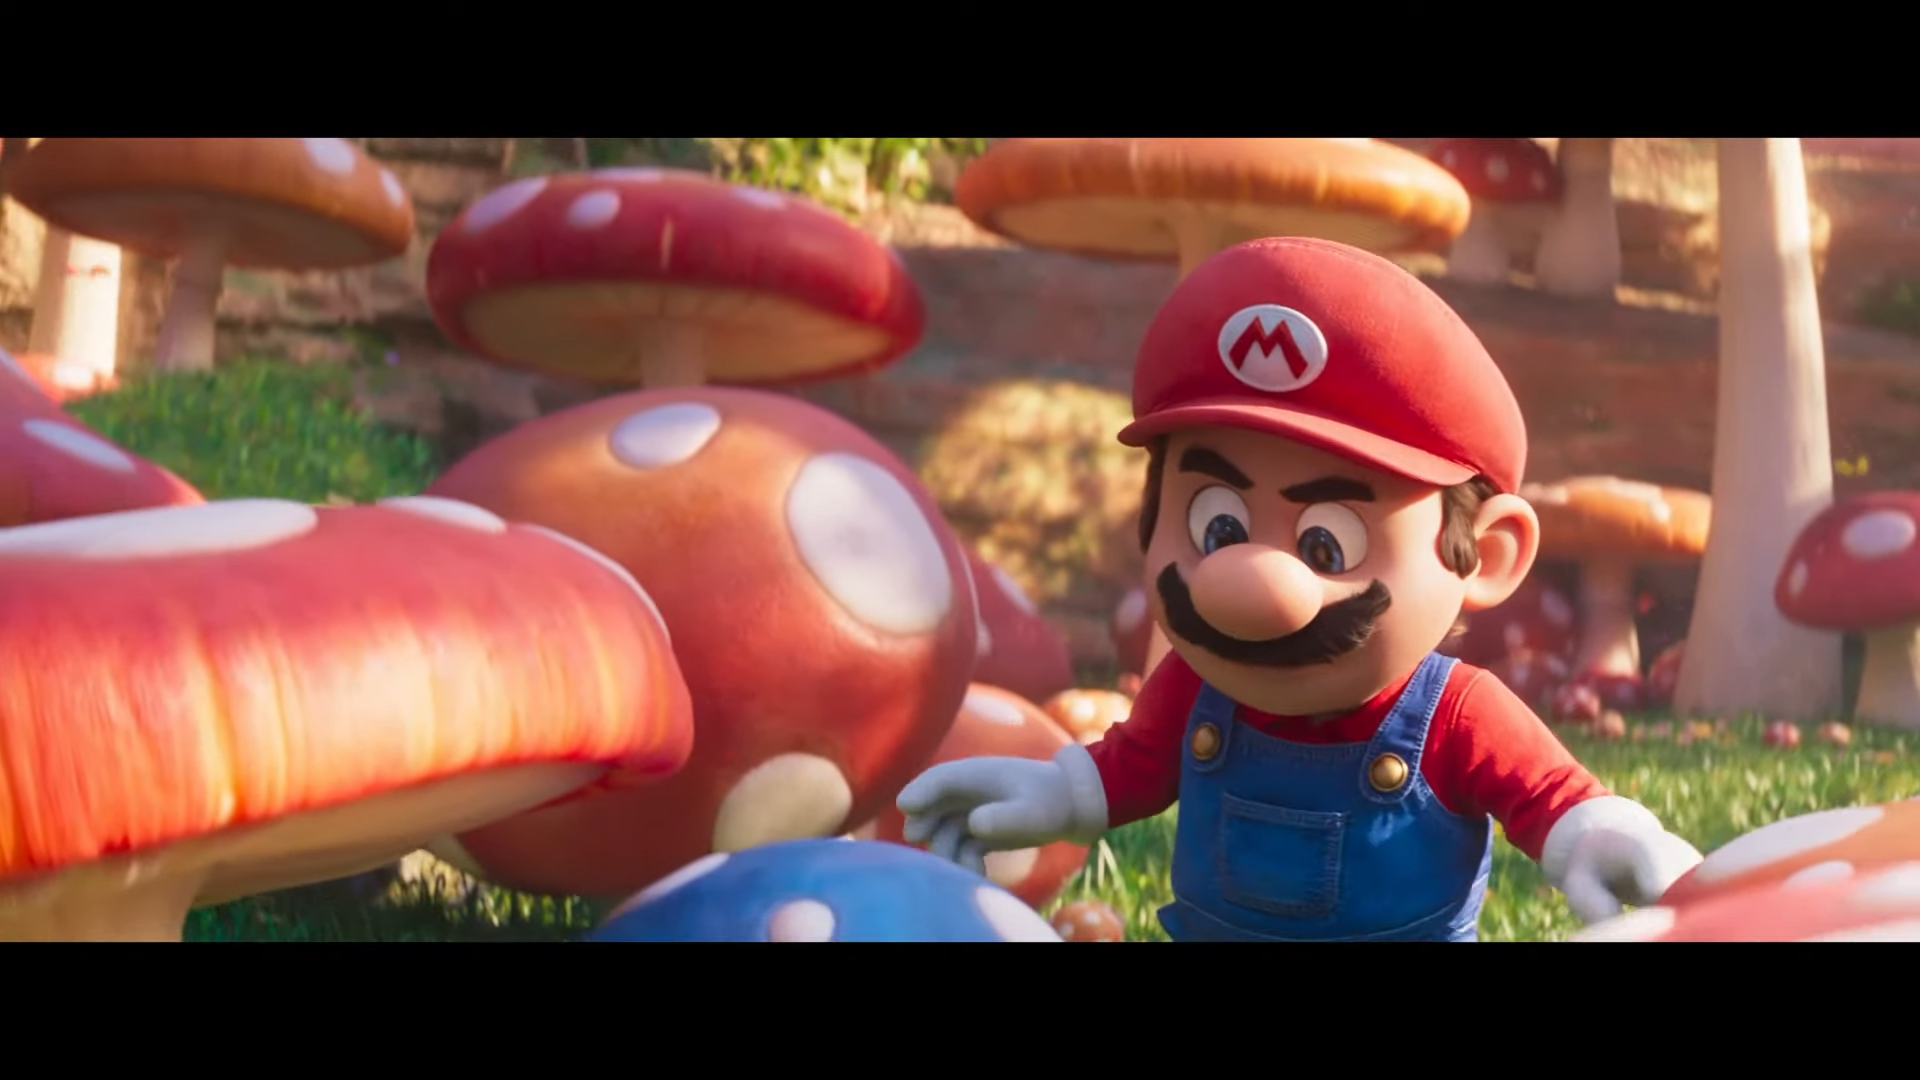 The Super Mario Bros. Movie Looks Better Than Expected